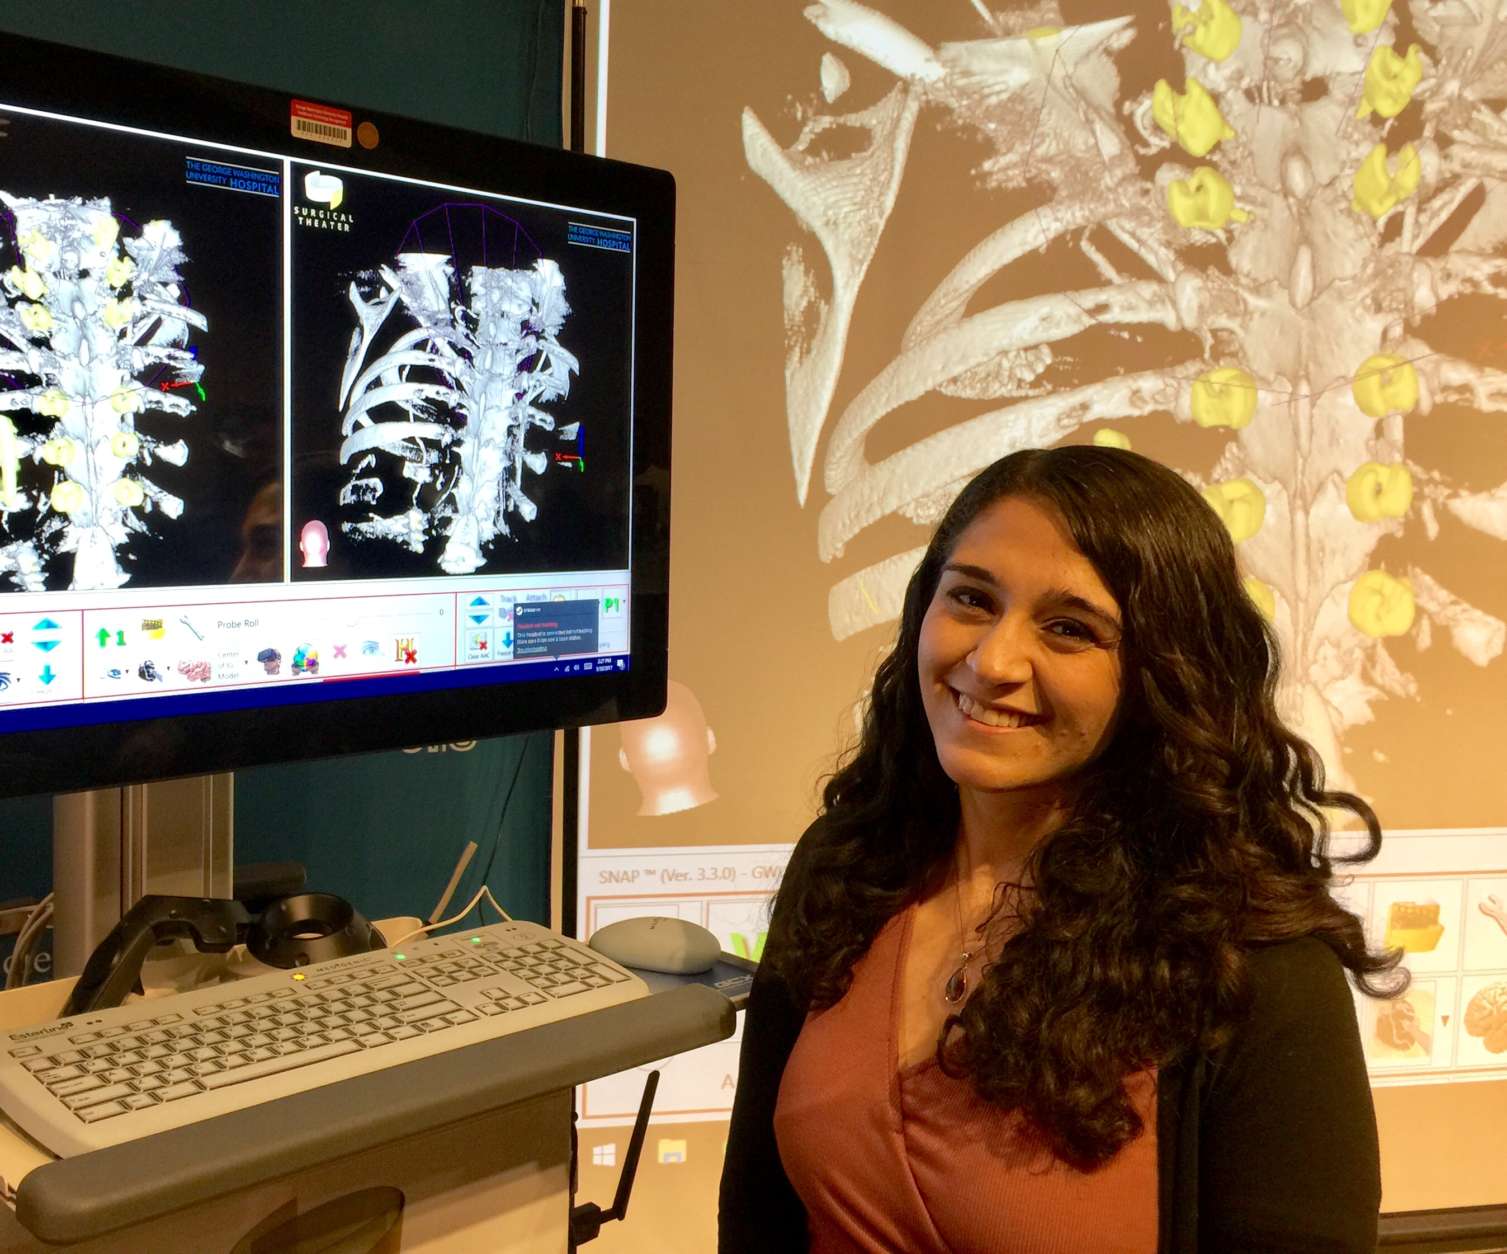 "It freaks me out to kind of look at it," former tumor patient Riz Chener said of examining the metal structure now holding a portion of her spine together. "I think it’s good to know, because, I mean, I feel certain parts of my body that are different." (WTOP/Kristi King)